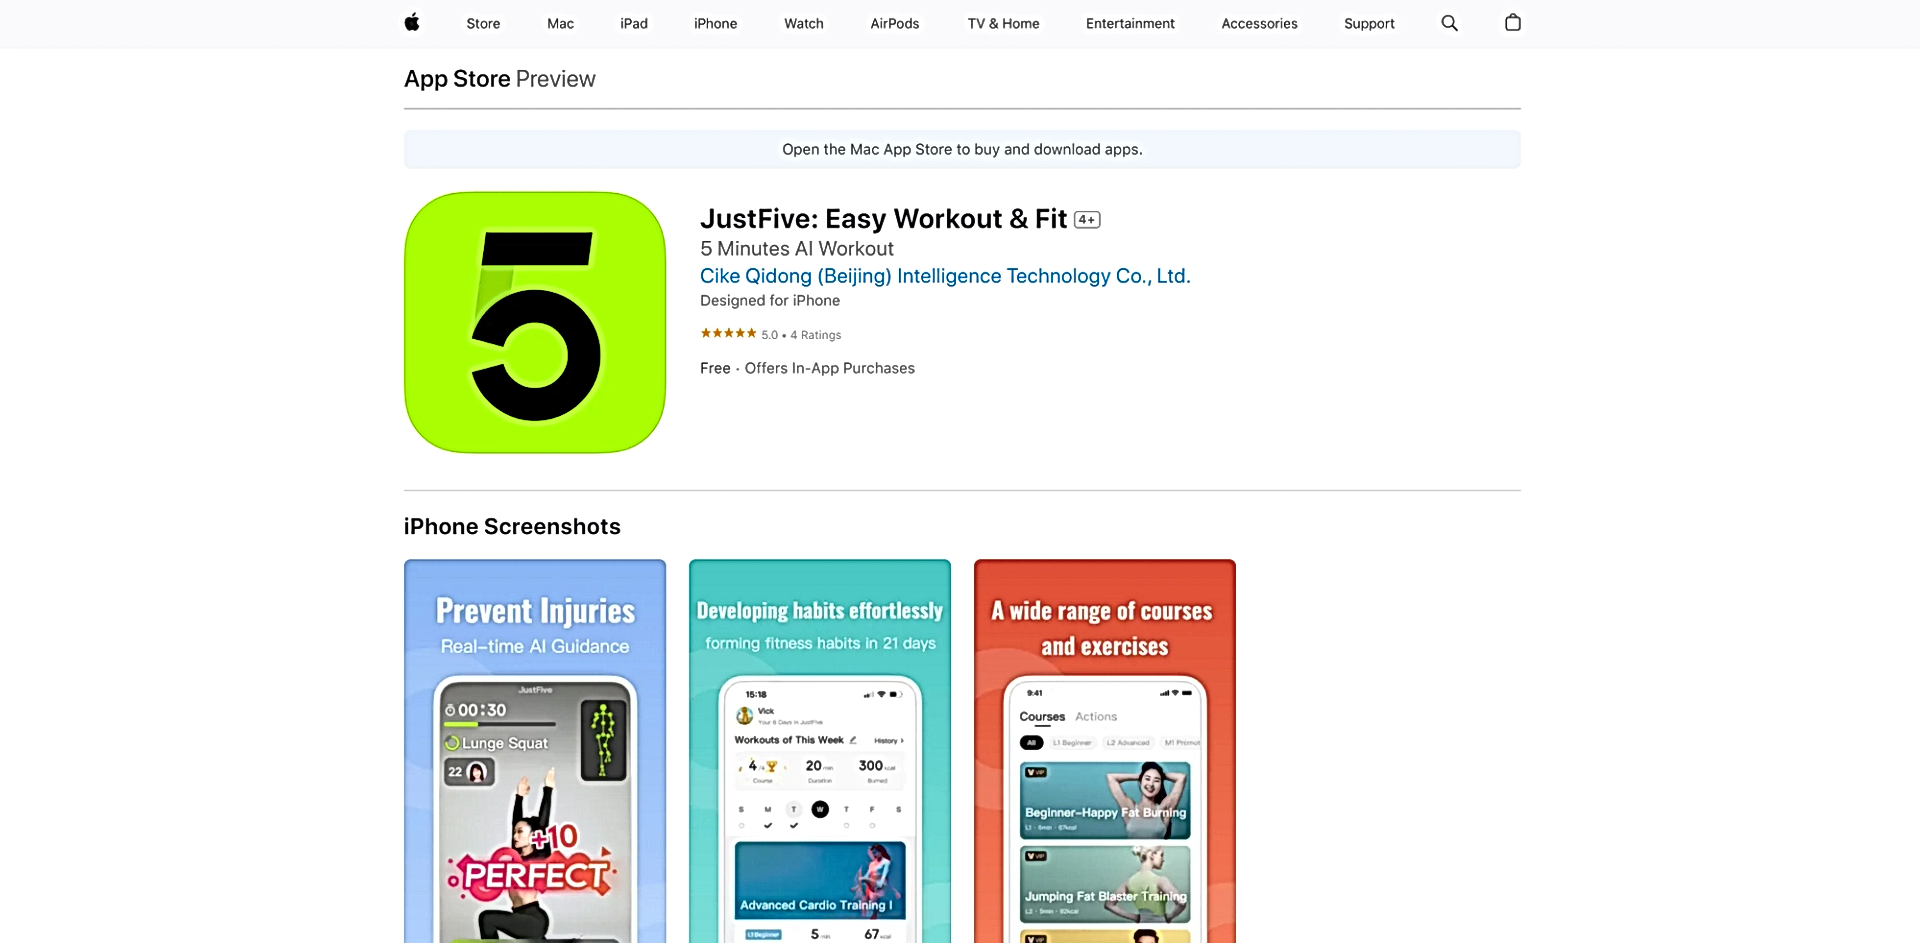 JustFive featured